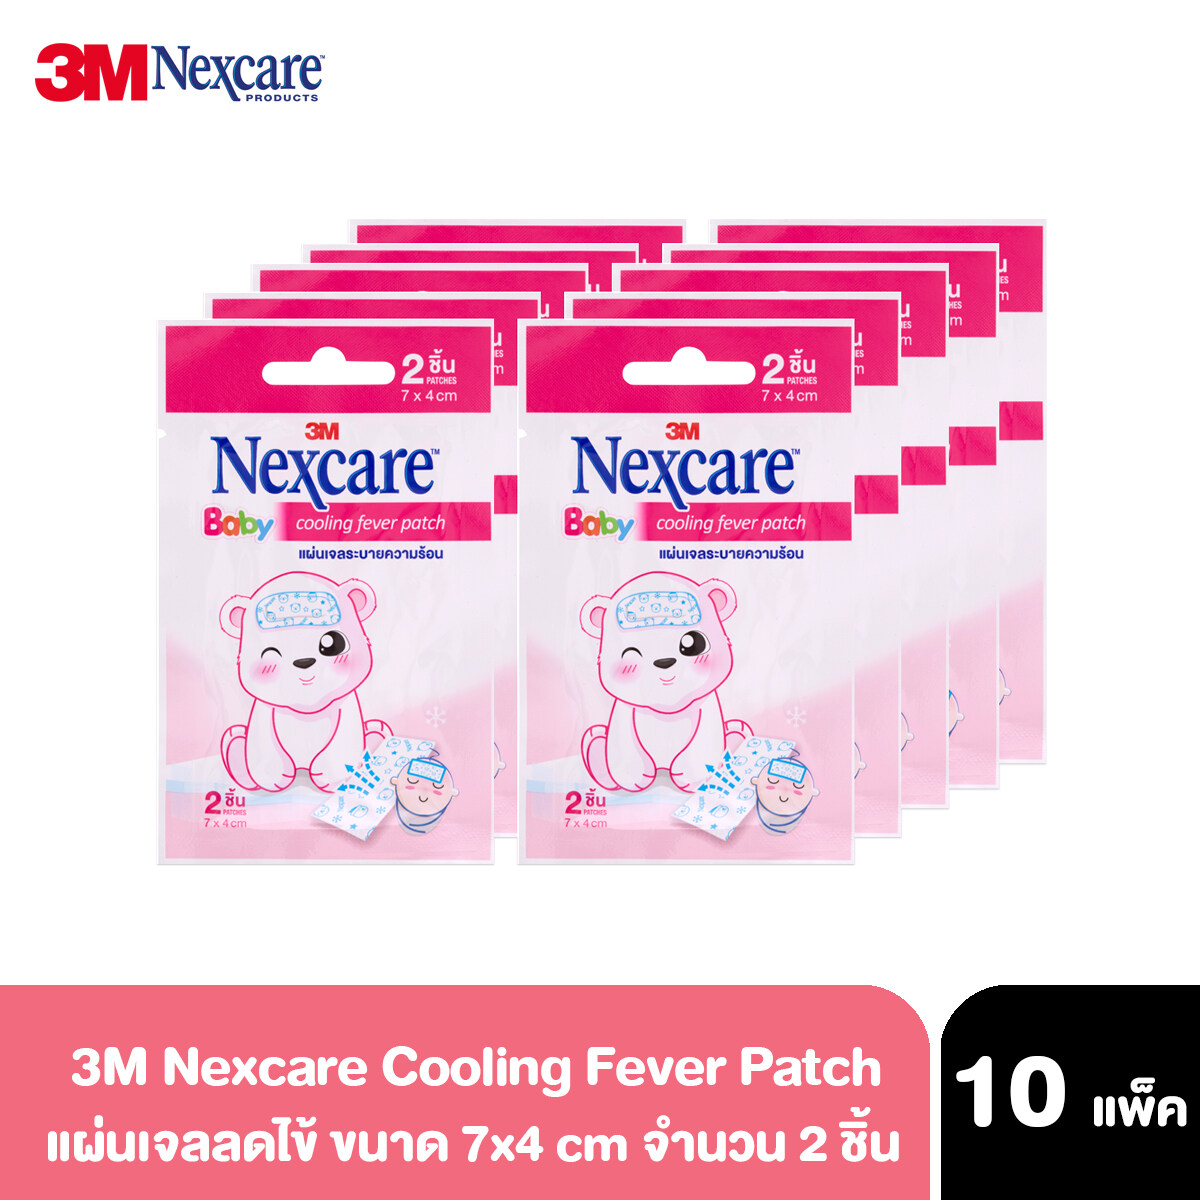 3M Nexcare Cooling Fever Baby Ŵ